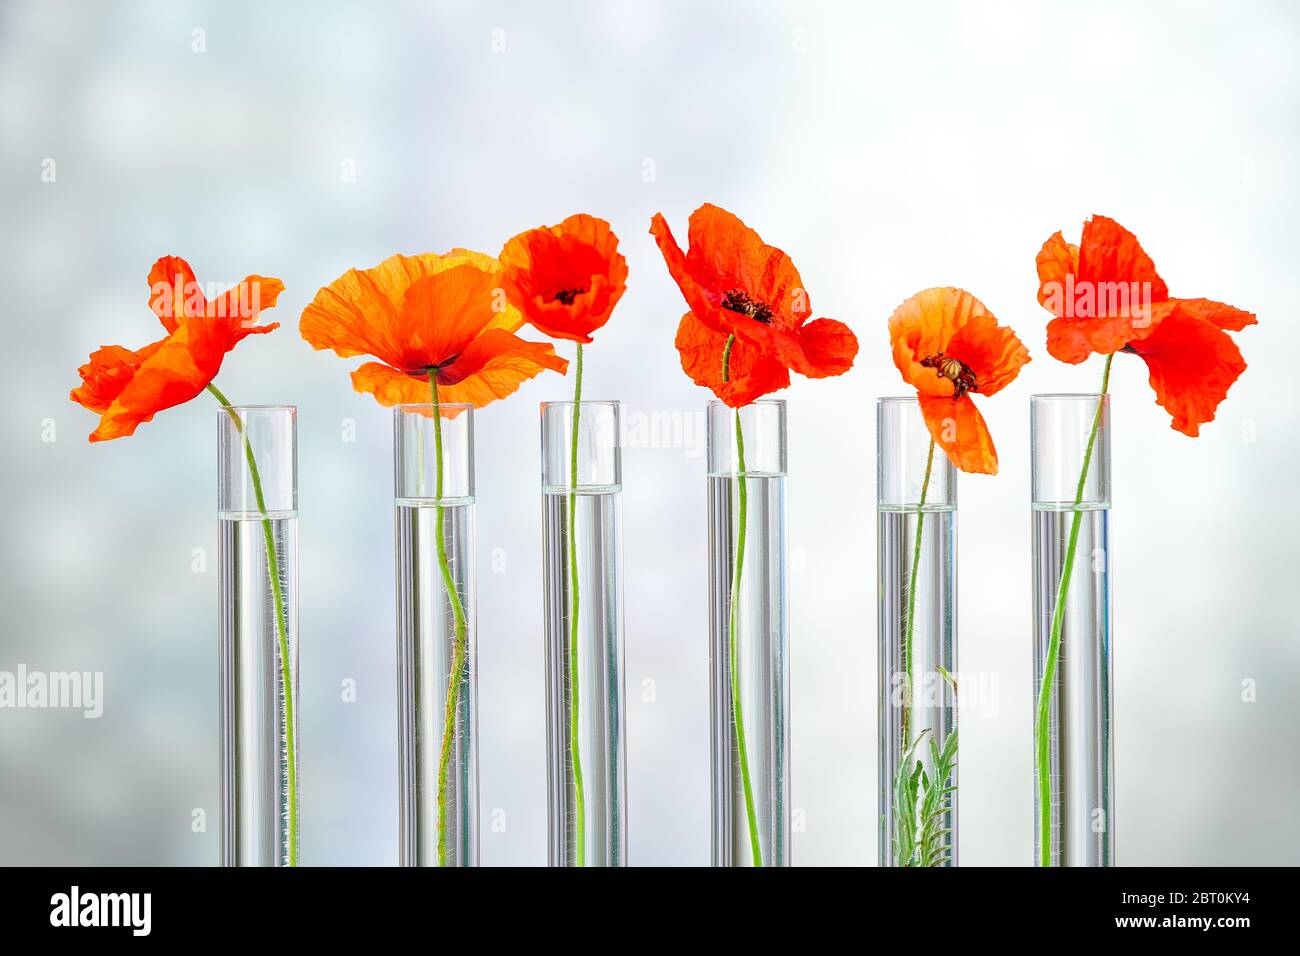 Poppies in test tube for herbal medicine and medicinal research. Stock Photo